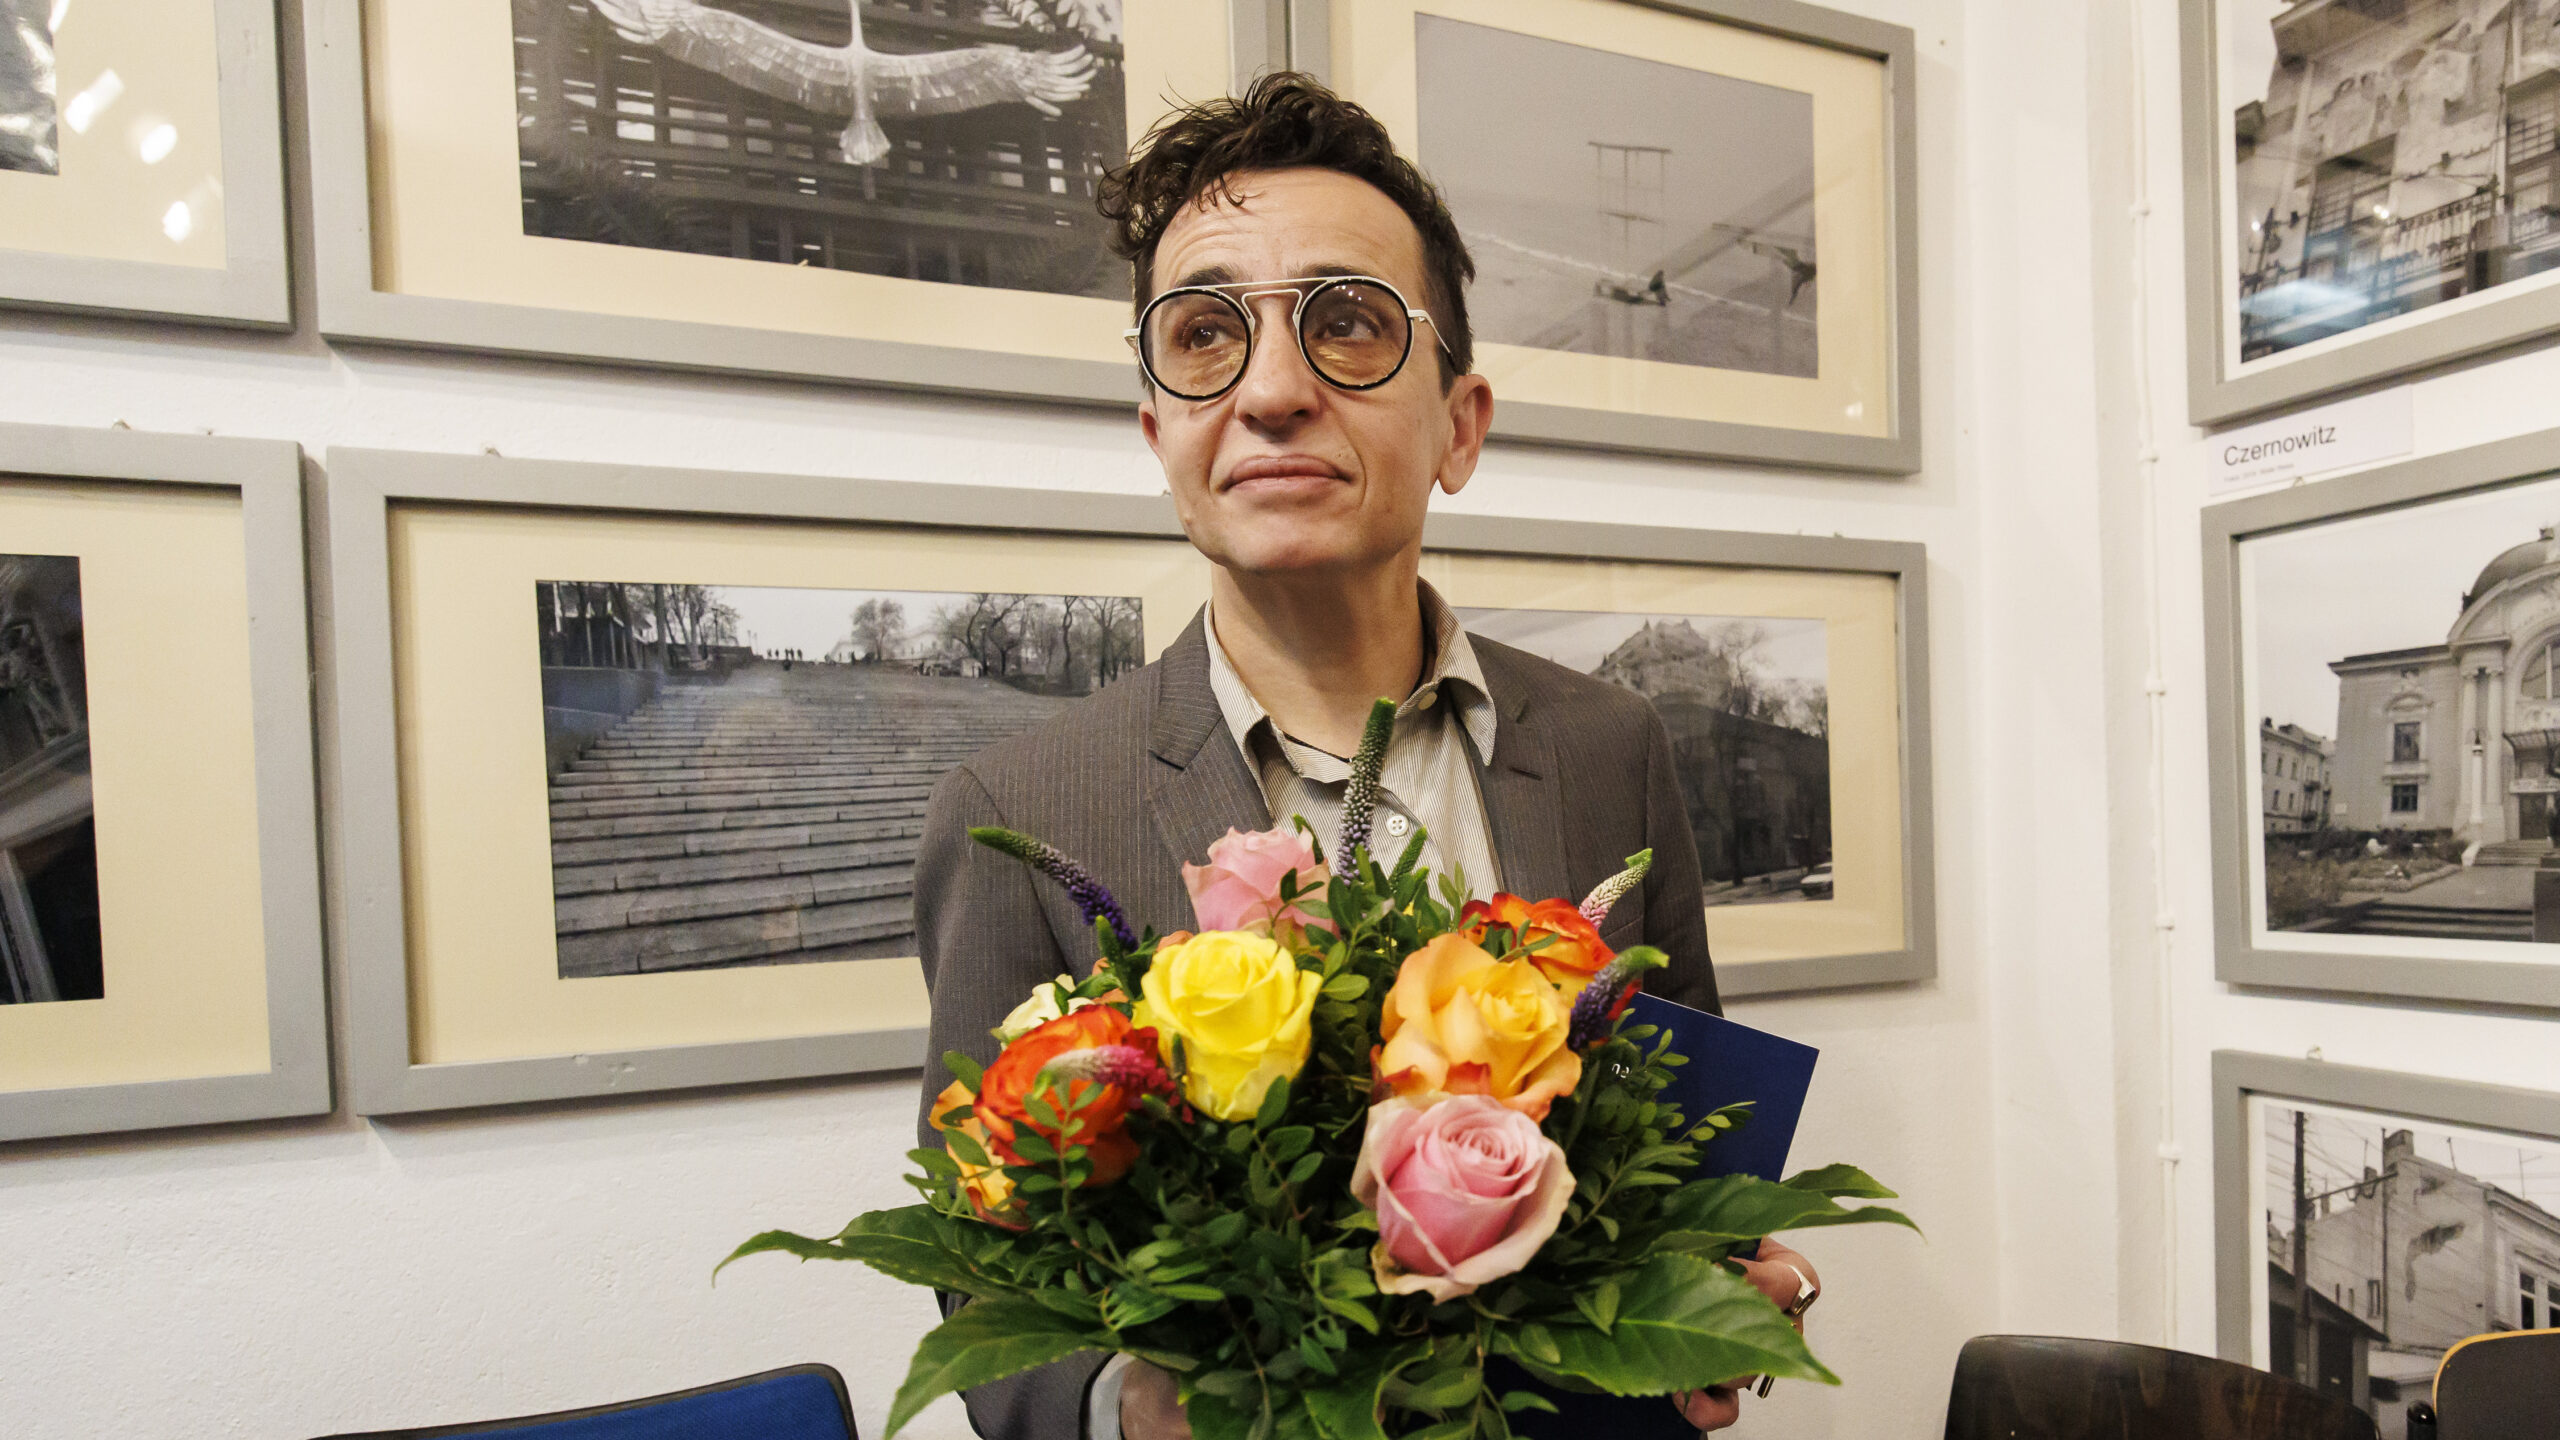 Journalist Masha Gessen received a prize named after political theorist Hannah Ahrendt in Bremen, Germany on Saturday.